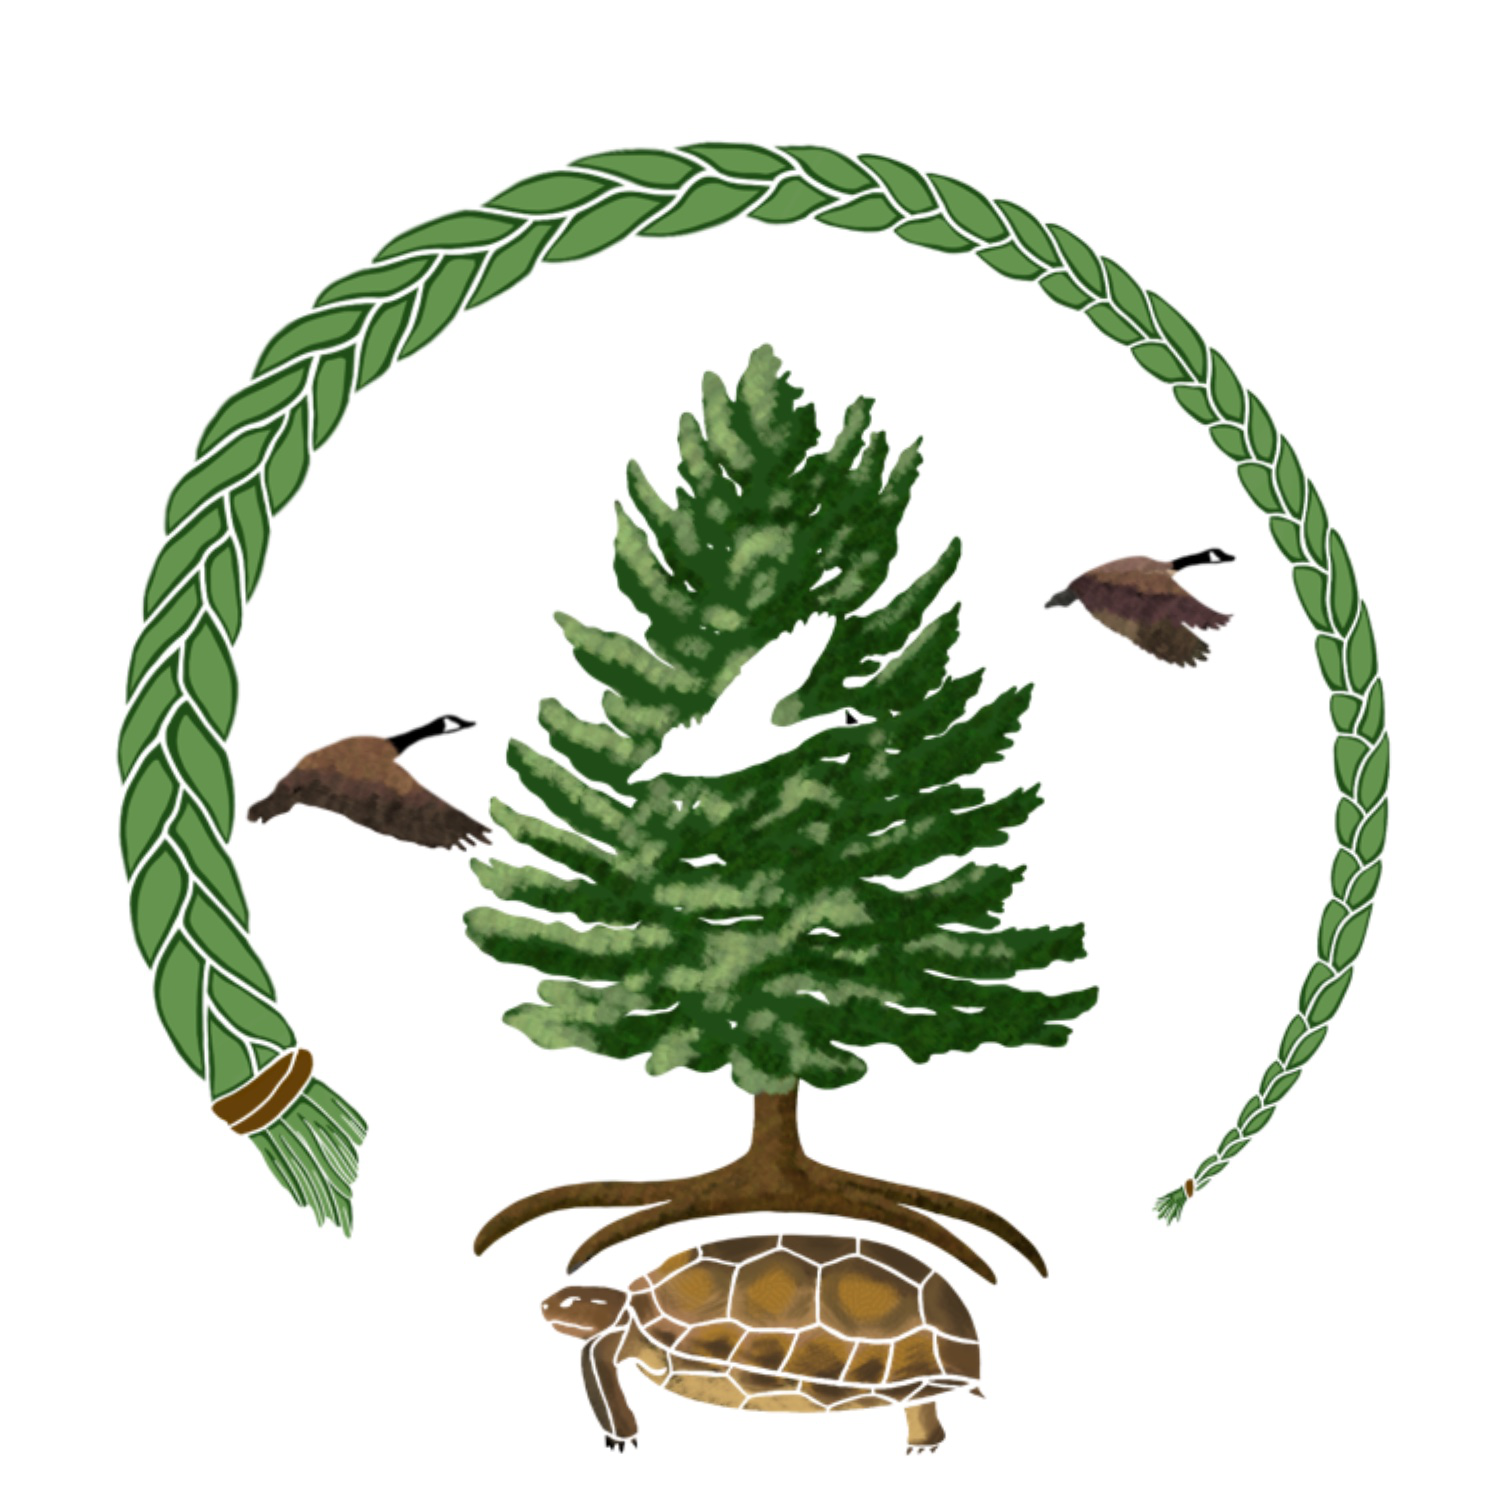 ITEP Logo with a tree, turtle, braided grass and geese